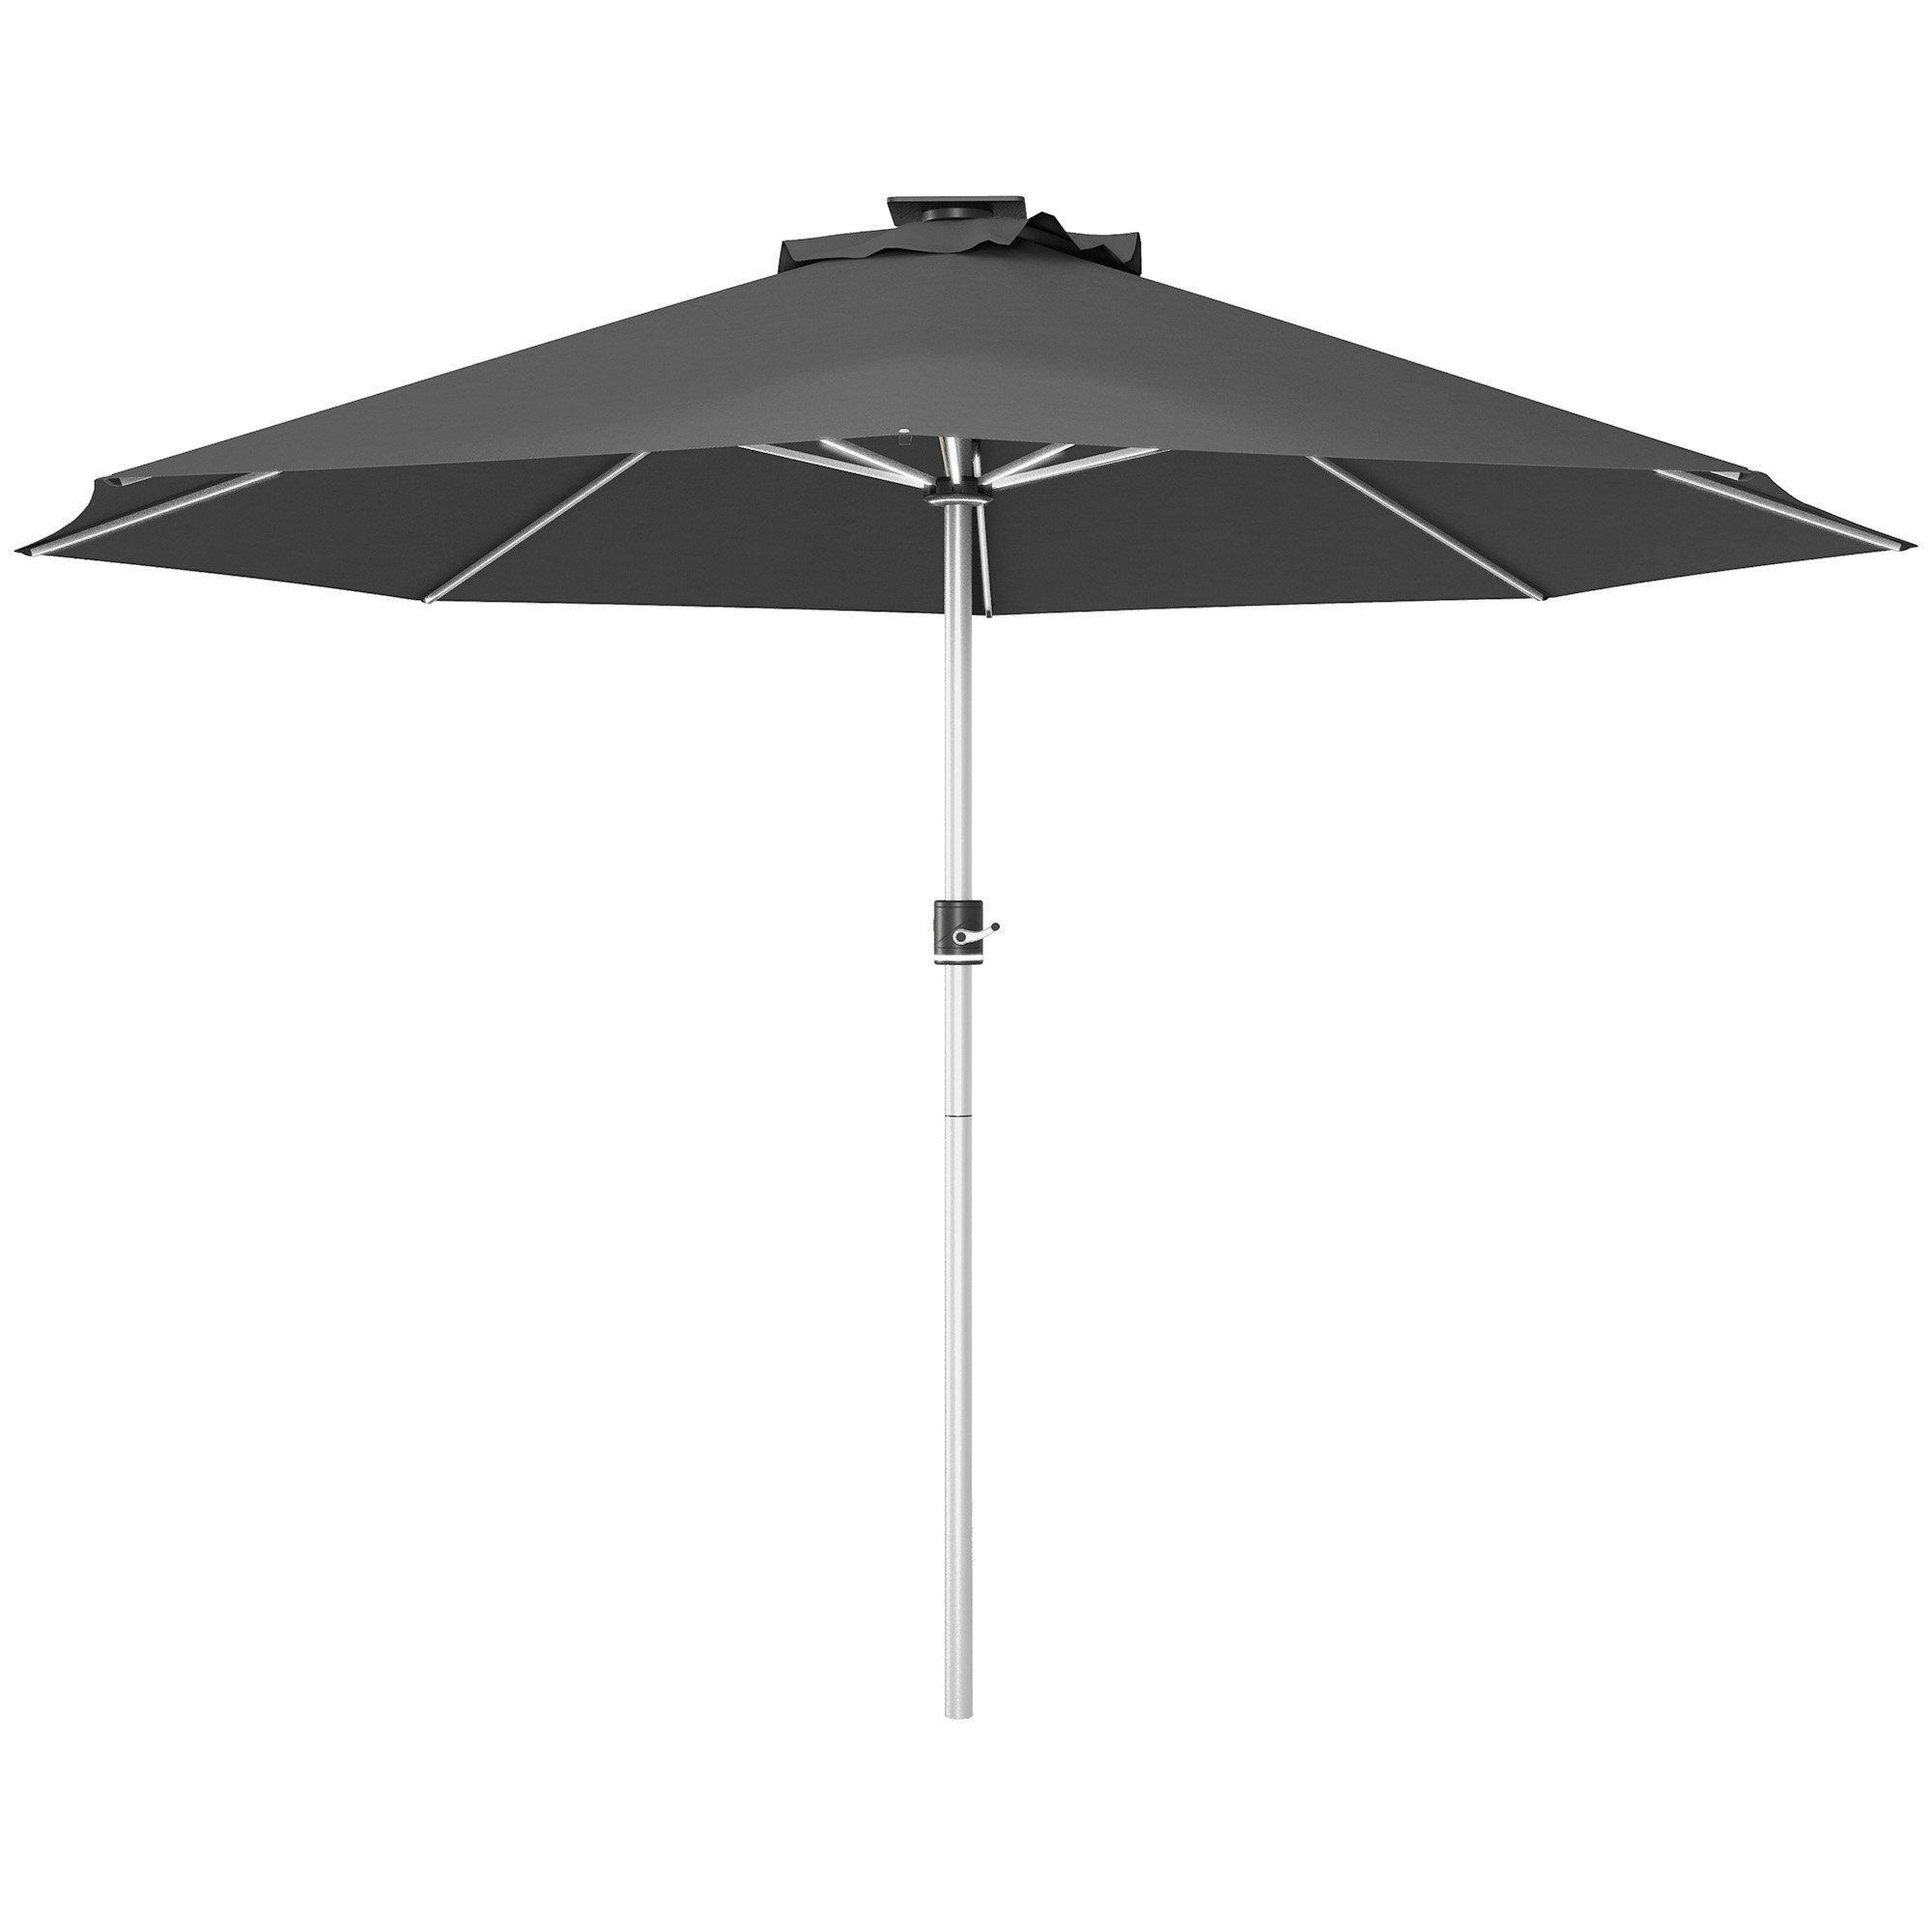 Garden Parasol with USB and Solar Charged LED Lights, Crank Handle, Grey - image 1